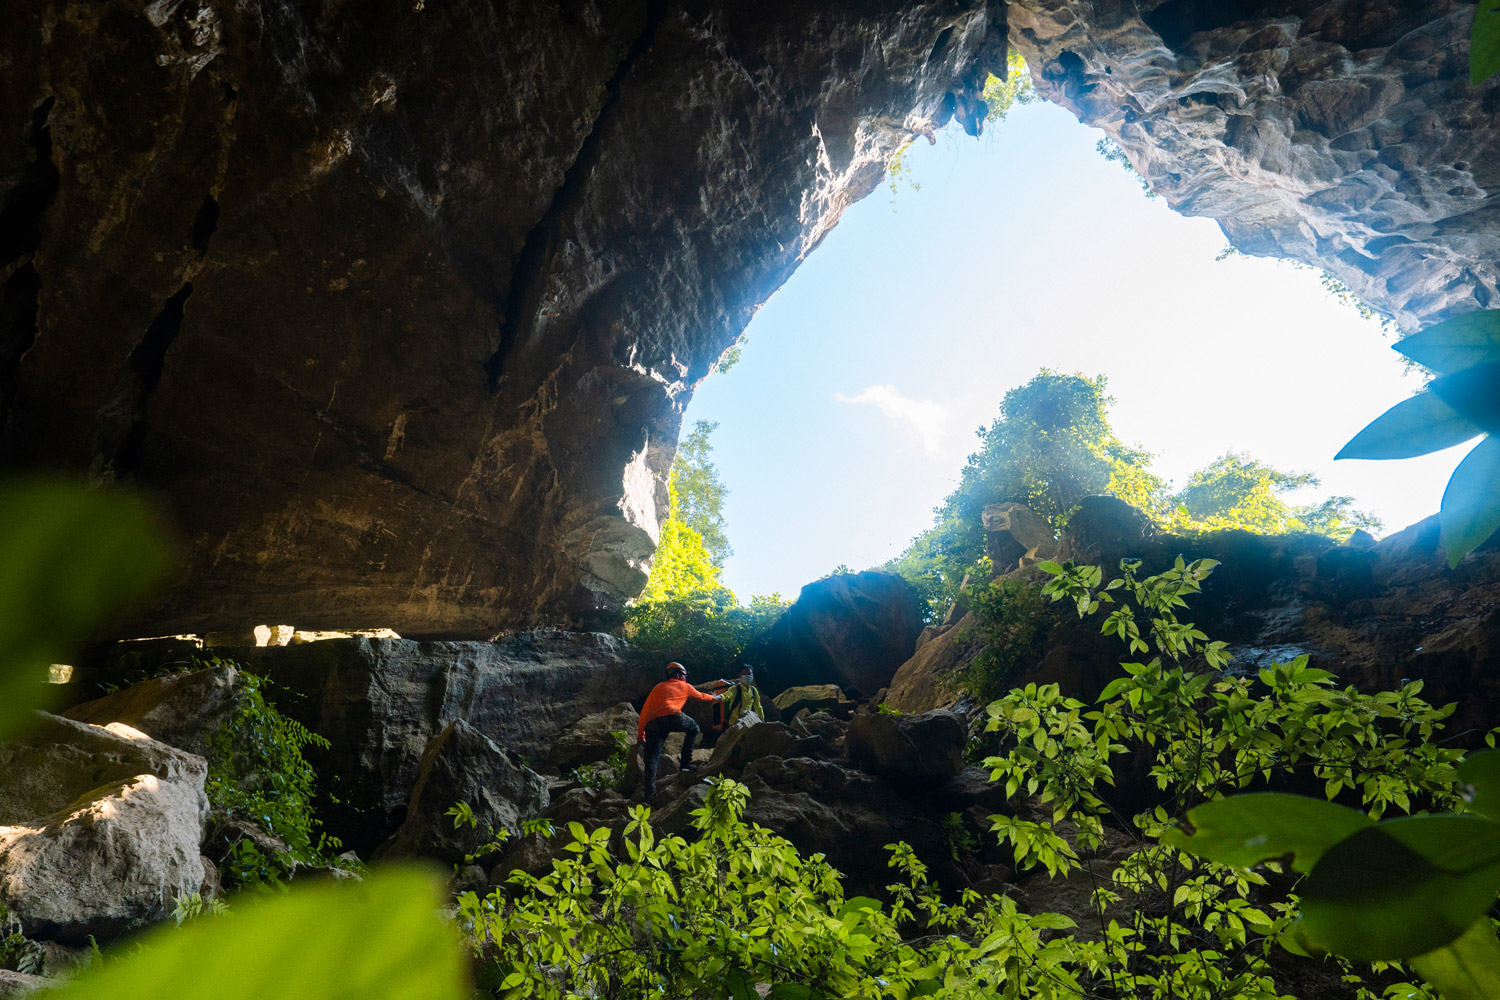 Experience awe-inspiring views as you gaze upon the breathtaking scenery from inside the cave.